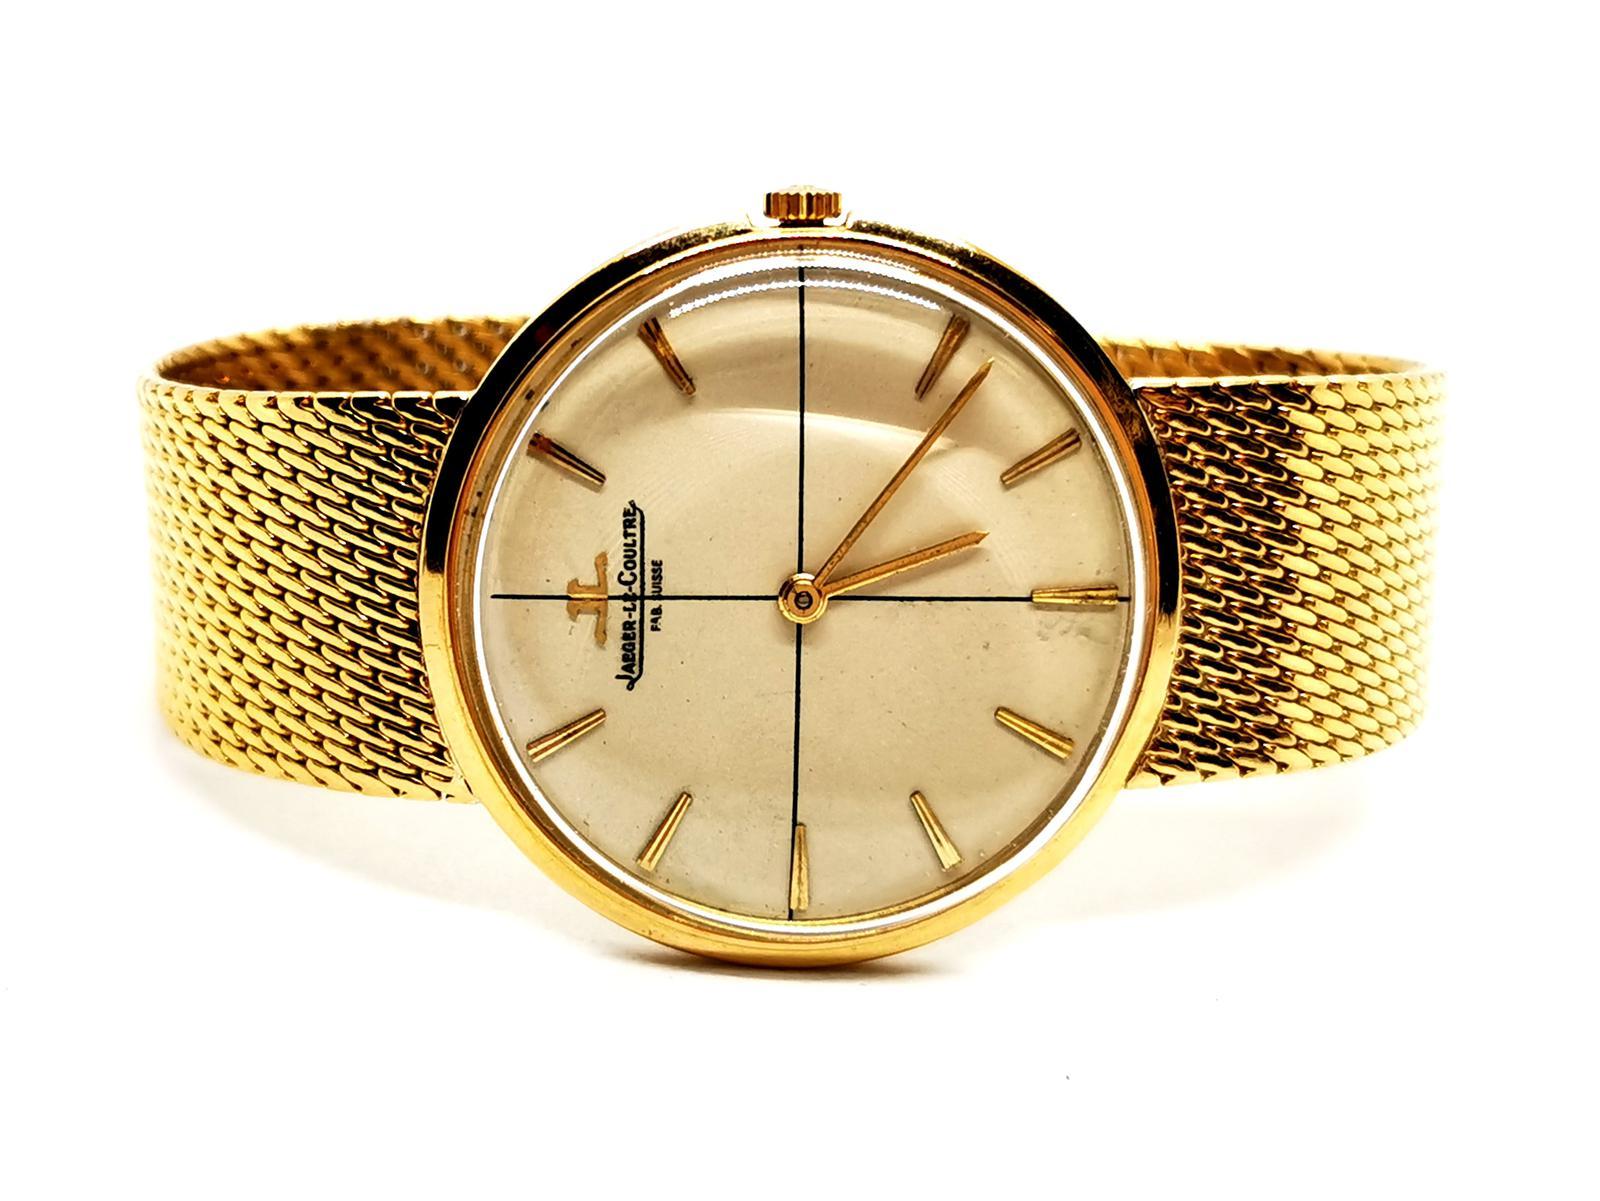 Women's watch. signed by Jaeger Lecoultre. in yellow gold 750 thousandths (18 carats). mechanical movement. round case 33mm. beige dial. golden hands. gold bar indexes. Milanese mesh bracelet. ratchet clasp with double 8 safety. plexiglass glass.